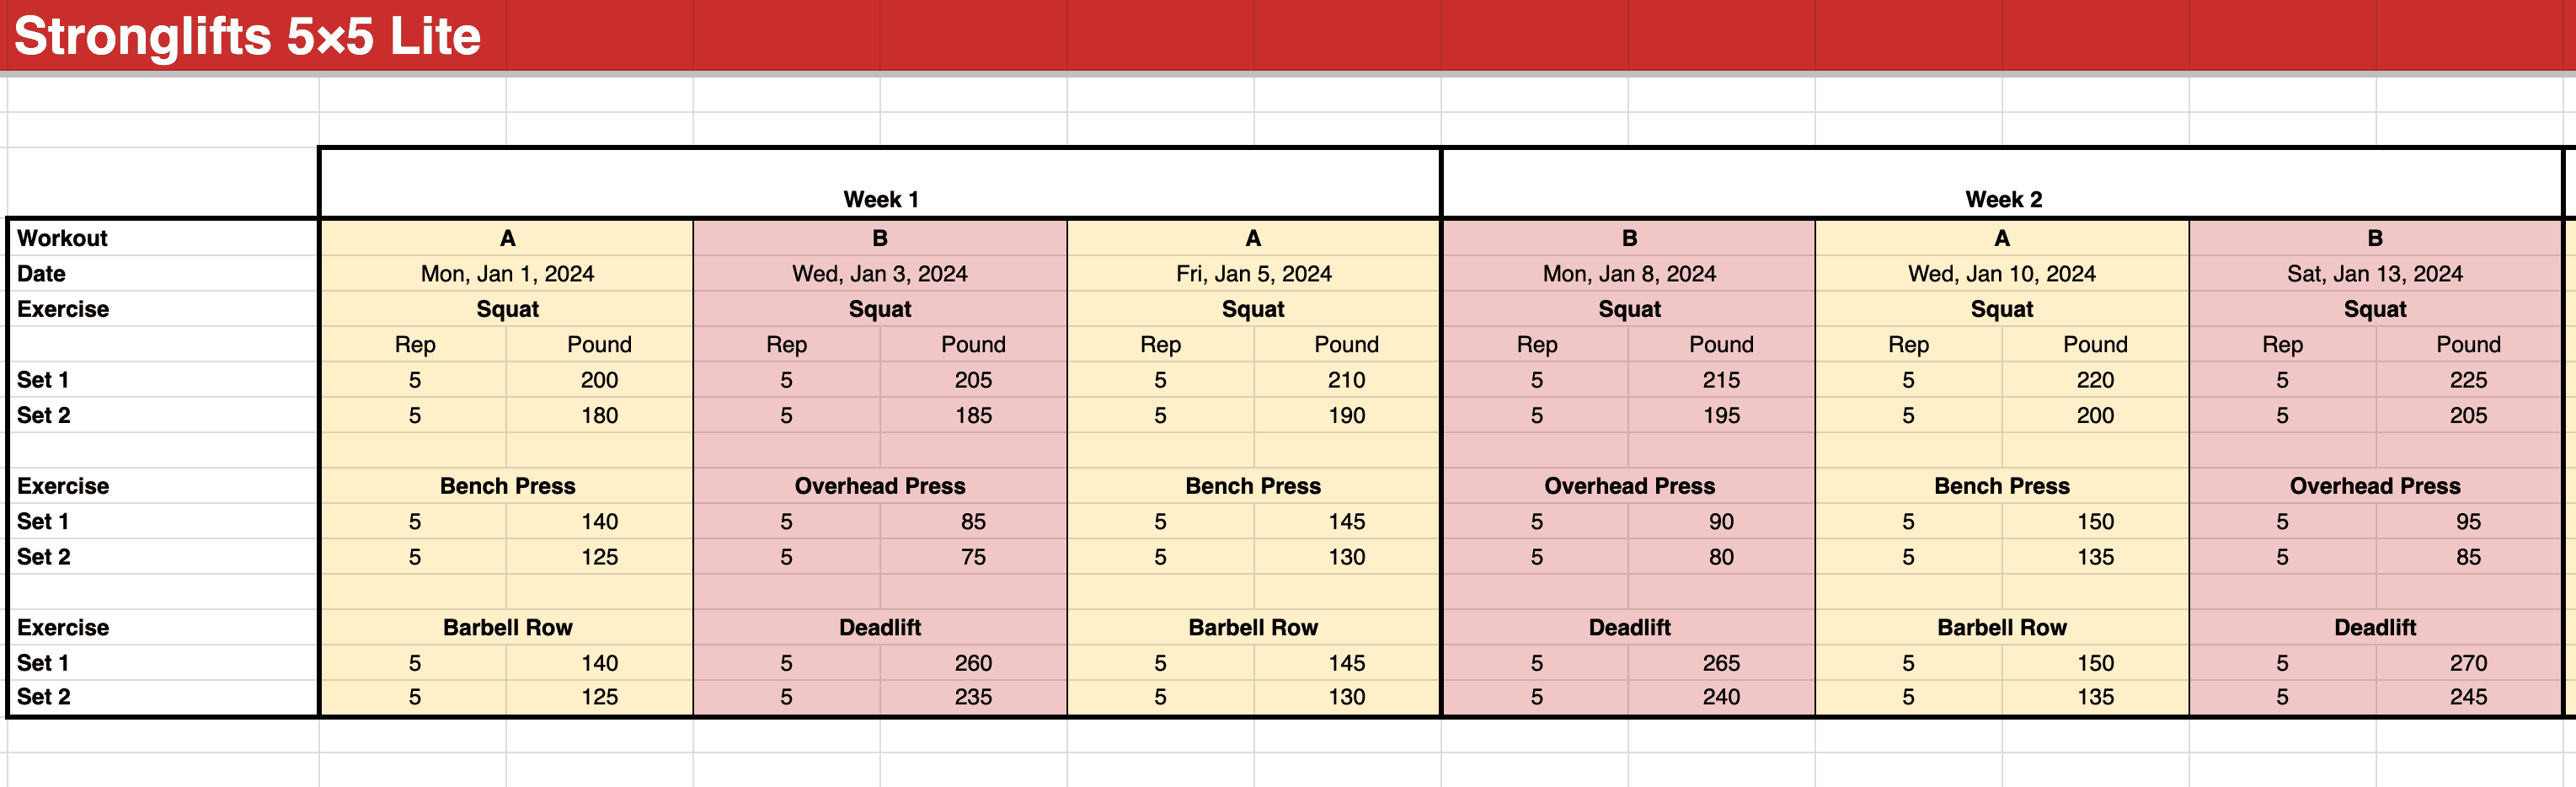 Stronglifts 5x5 Lite Spreadsheet